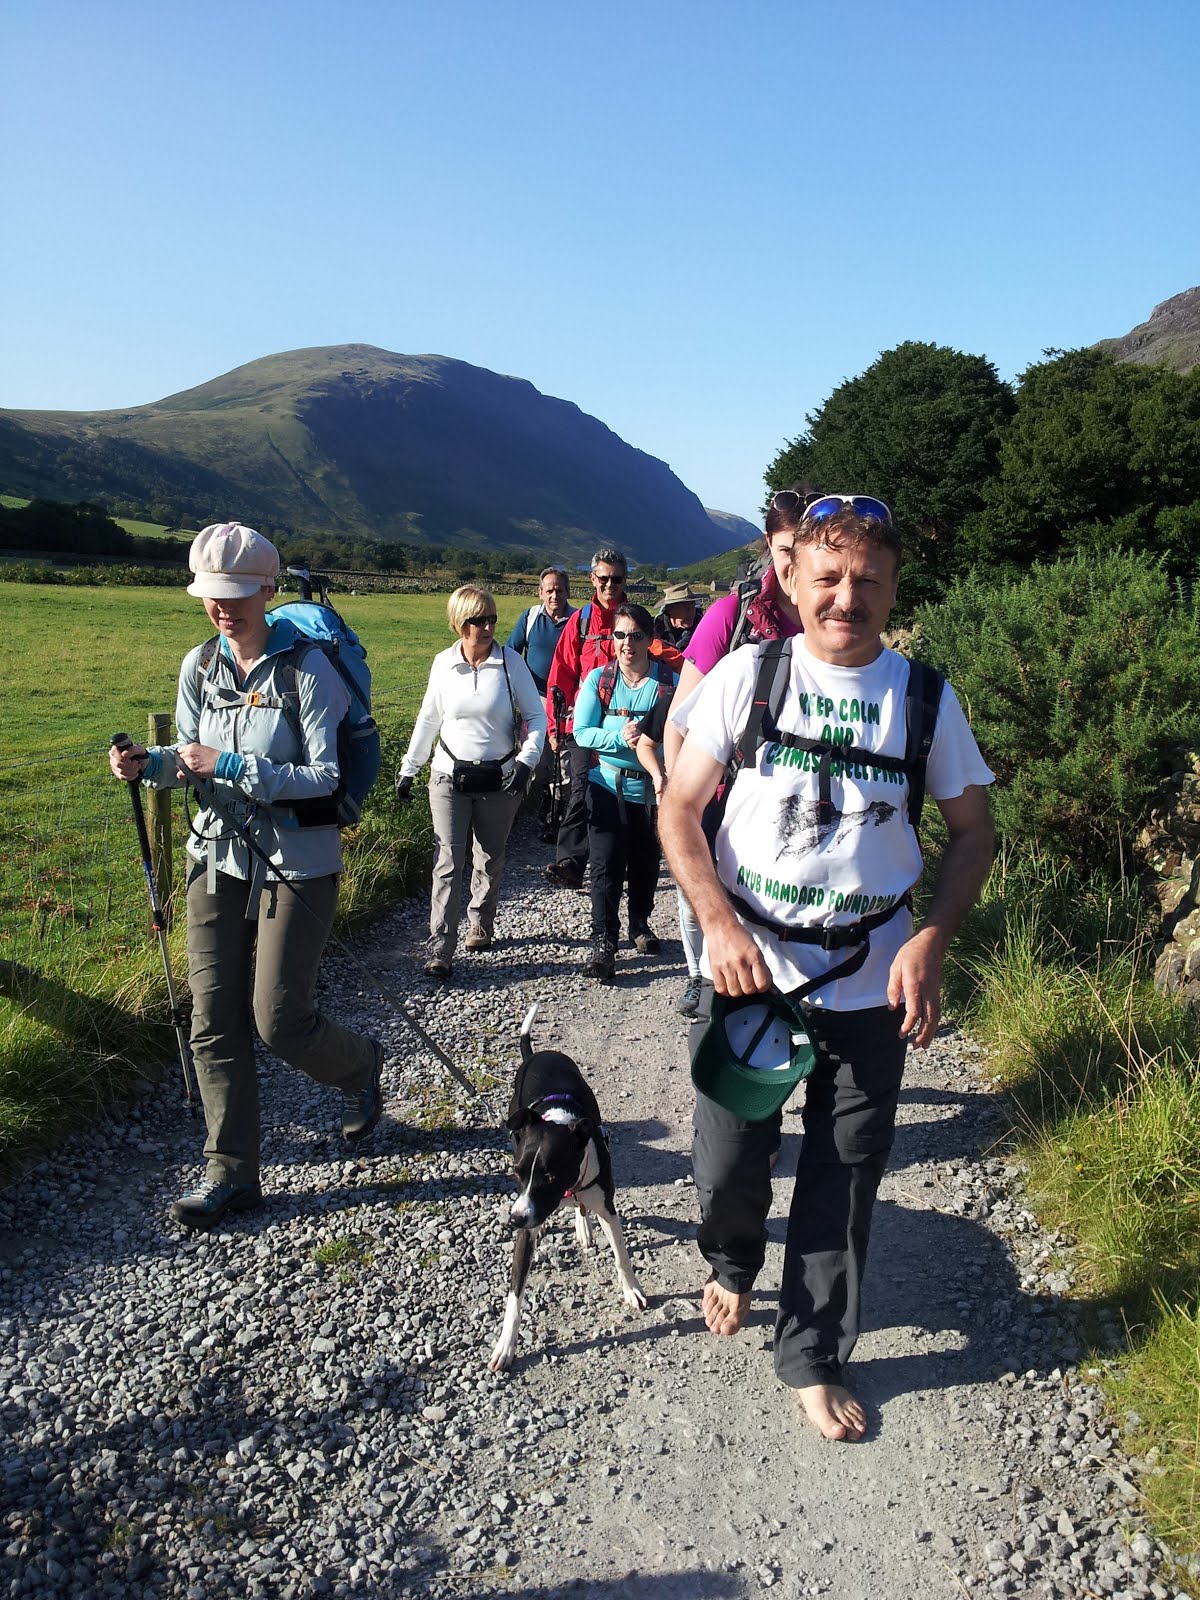 THANKS GOD I COULD ABLE TO COMPLETE MY BAREFOOT CHARITY WALK UP TO SCAFELL PIKE AND BACK